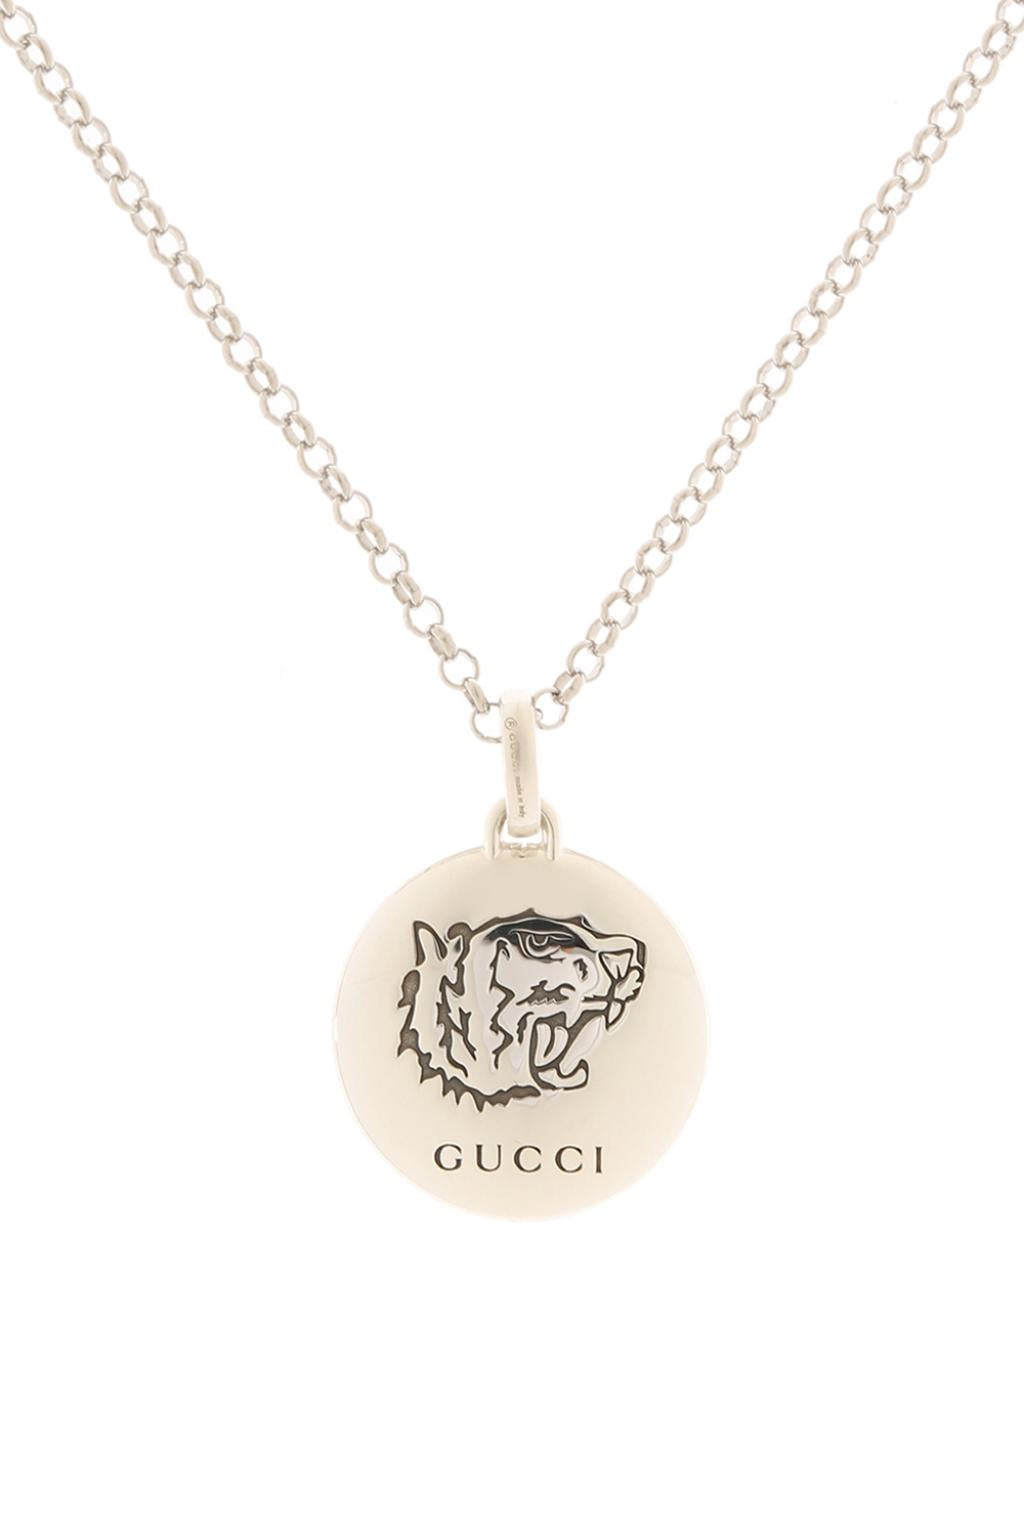 Gucci Blind X Love Round Necklace in Silver